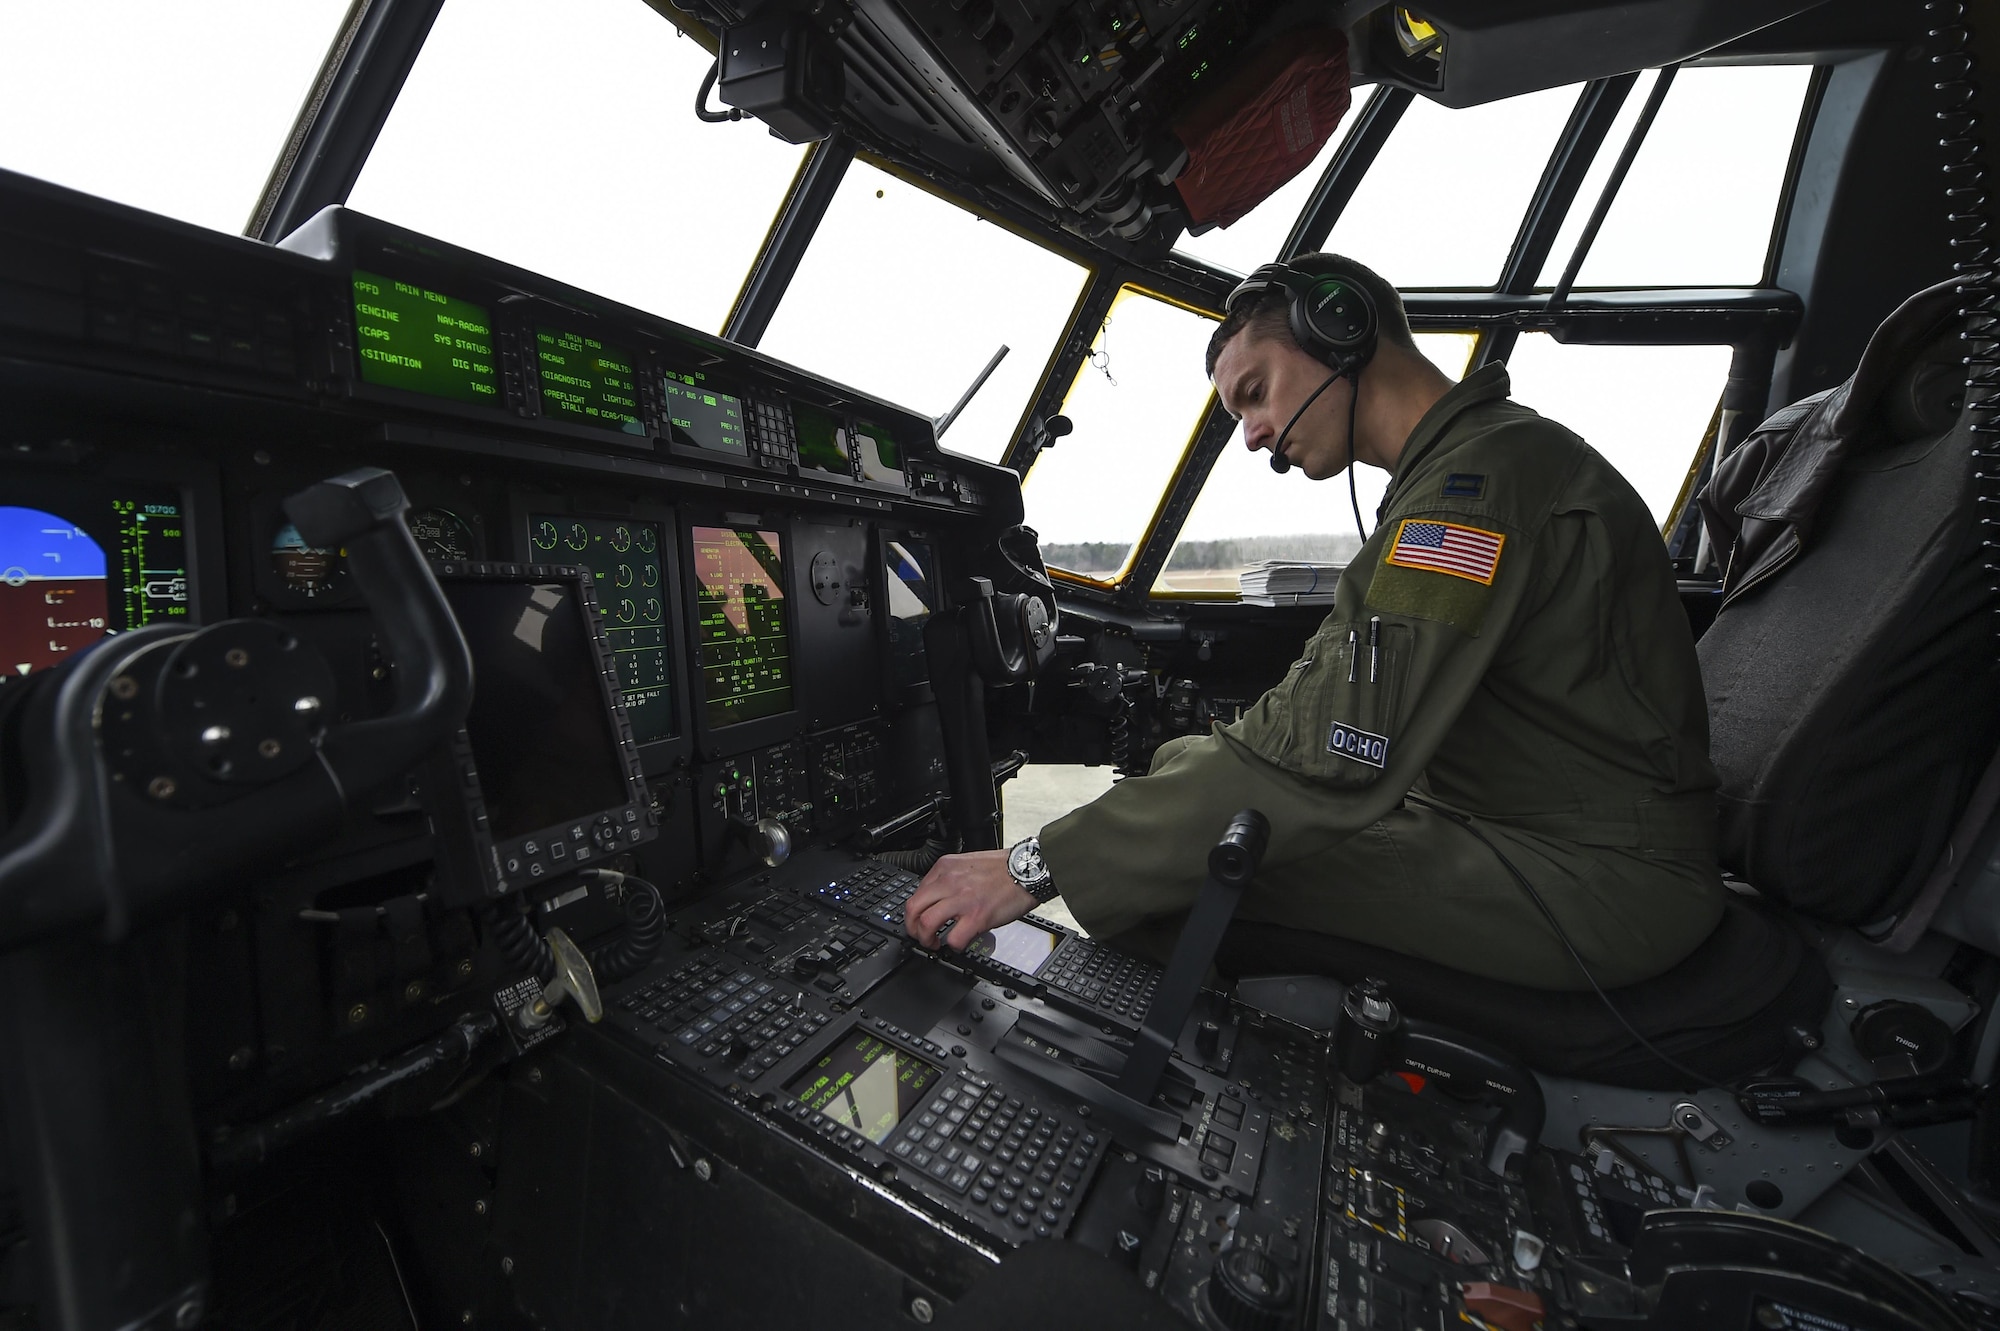 U.S. Air Force Capt. Kyle Gauthier, 61st Airlift Squadron C-130J pilot and flight commander, conducts a preflight checklist for a training sortie flight Feb. 3, 2017, at Little Rock Air Force Base, Ark. During the flight, aircrews tested the operability of recent hardware and software upgrades. (U.S. Air Force photo/Senior Airman Harry Brexel)